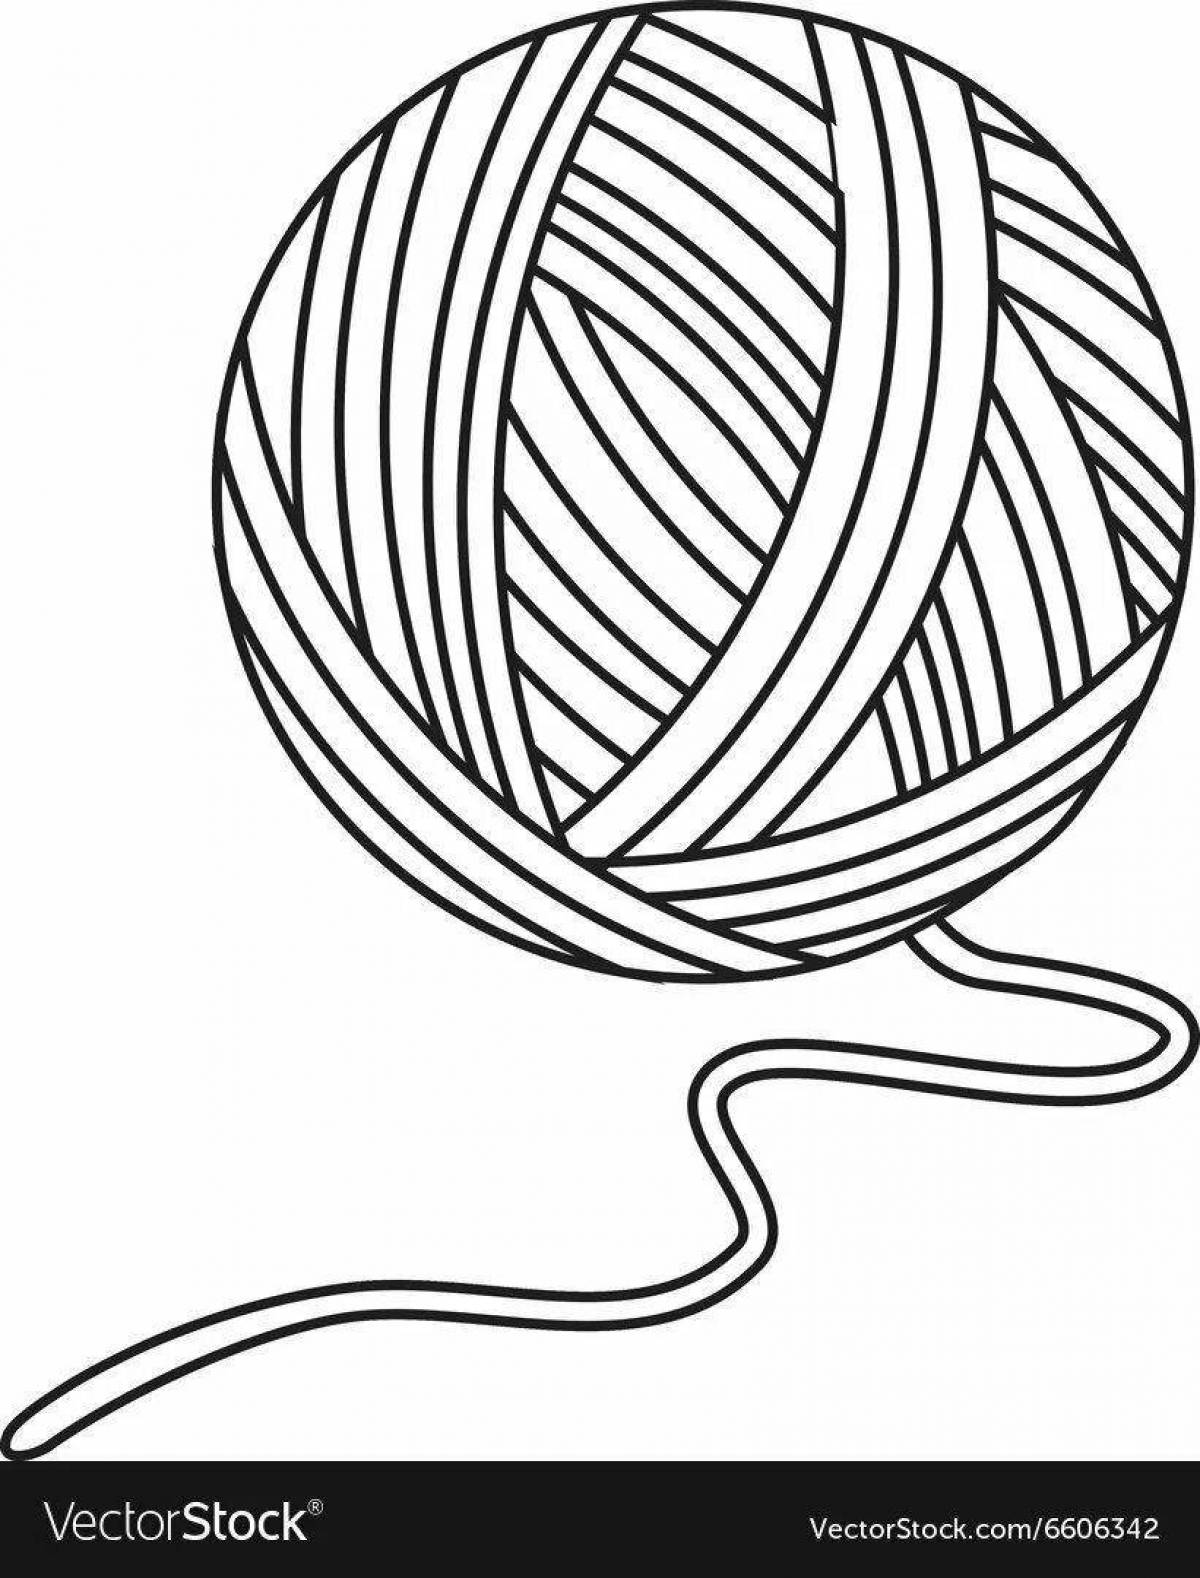 Radiant coloring page threads for toddlers